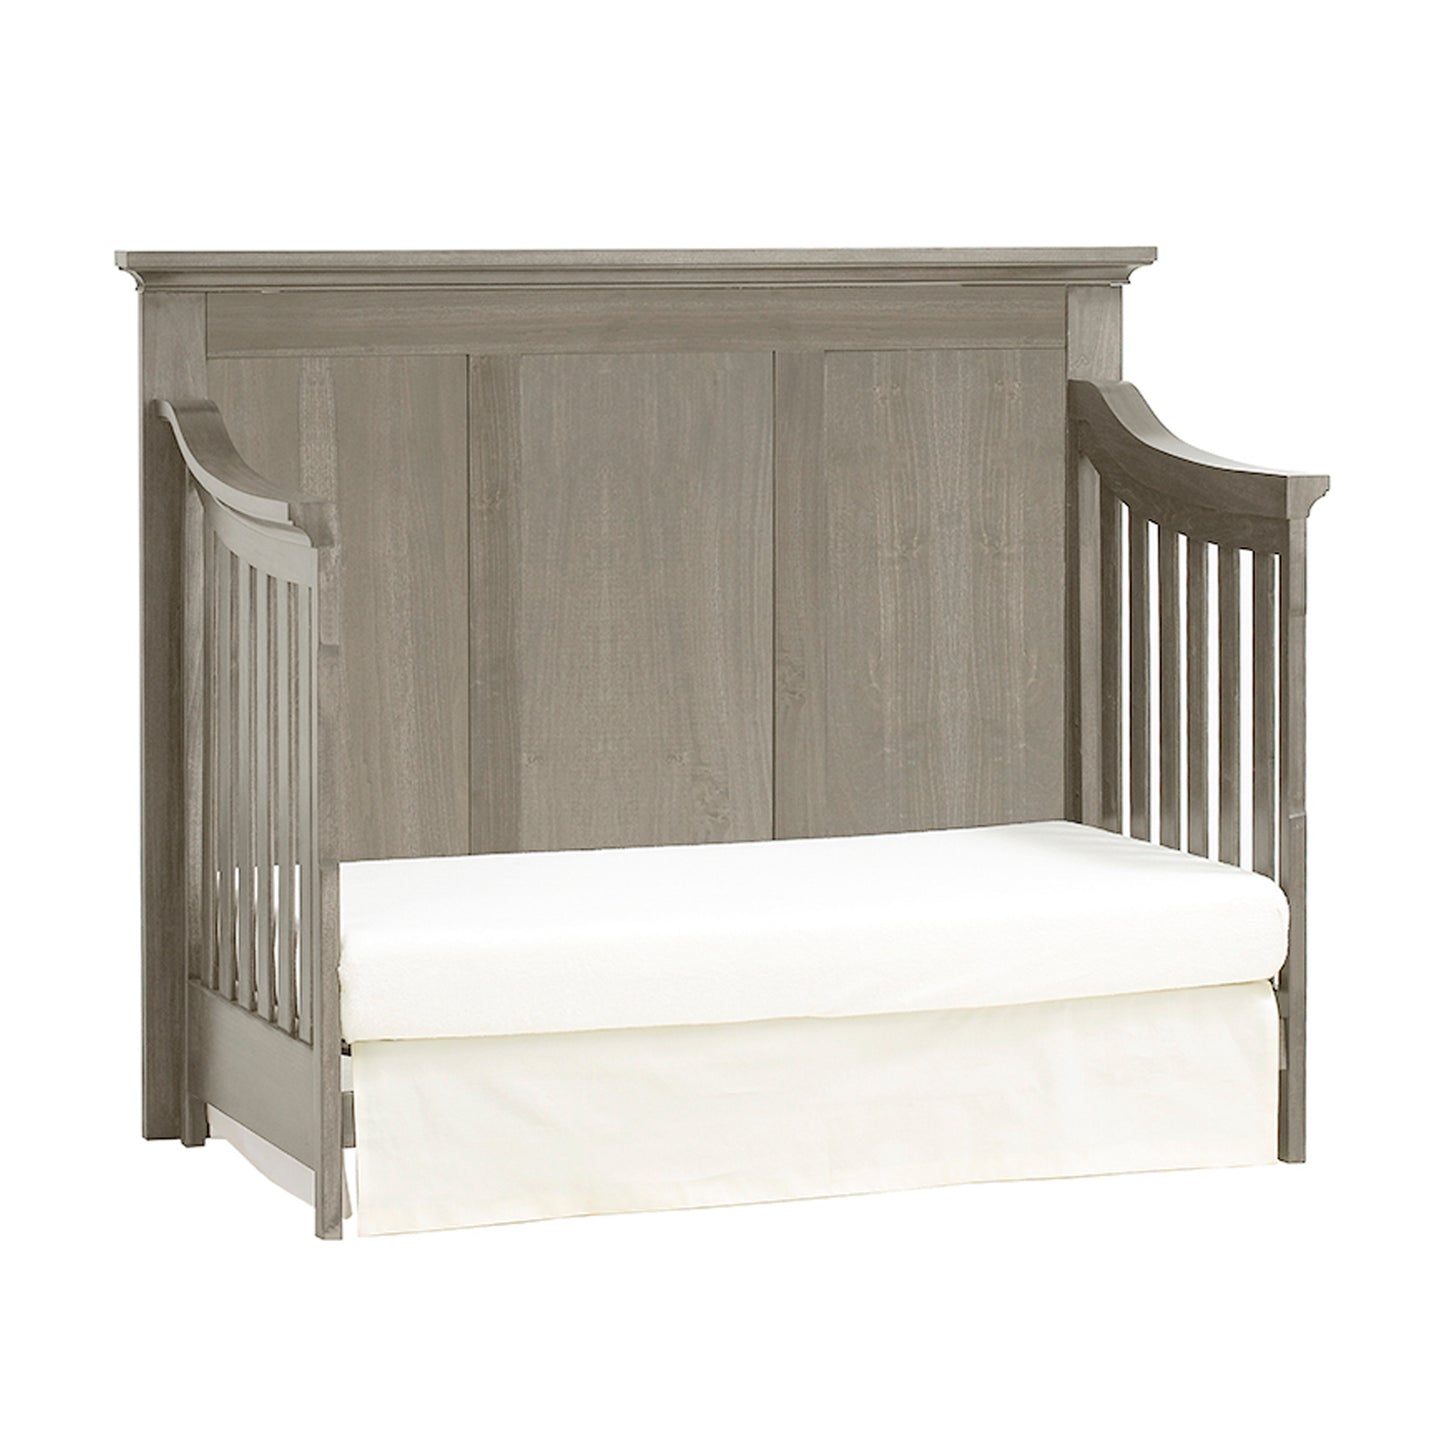 Ash Gray Solid and Manufactured Wood Standard Four In One Convertible Crib